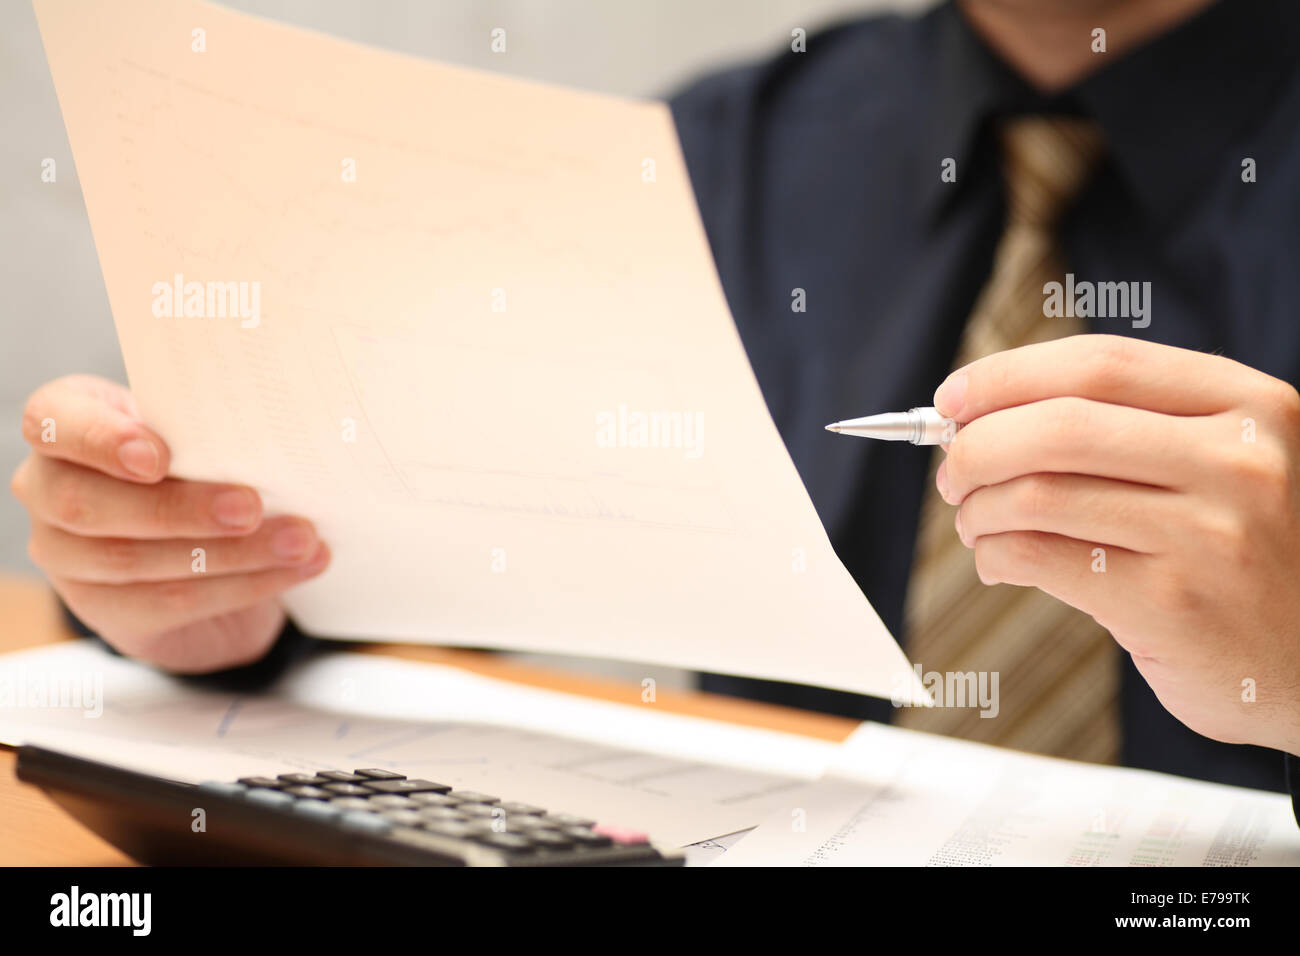 Businessman viewing financial statements. Shallow depth of field. Focus on hand and pen. Close-up. Stock Photo